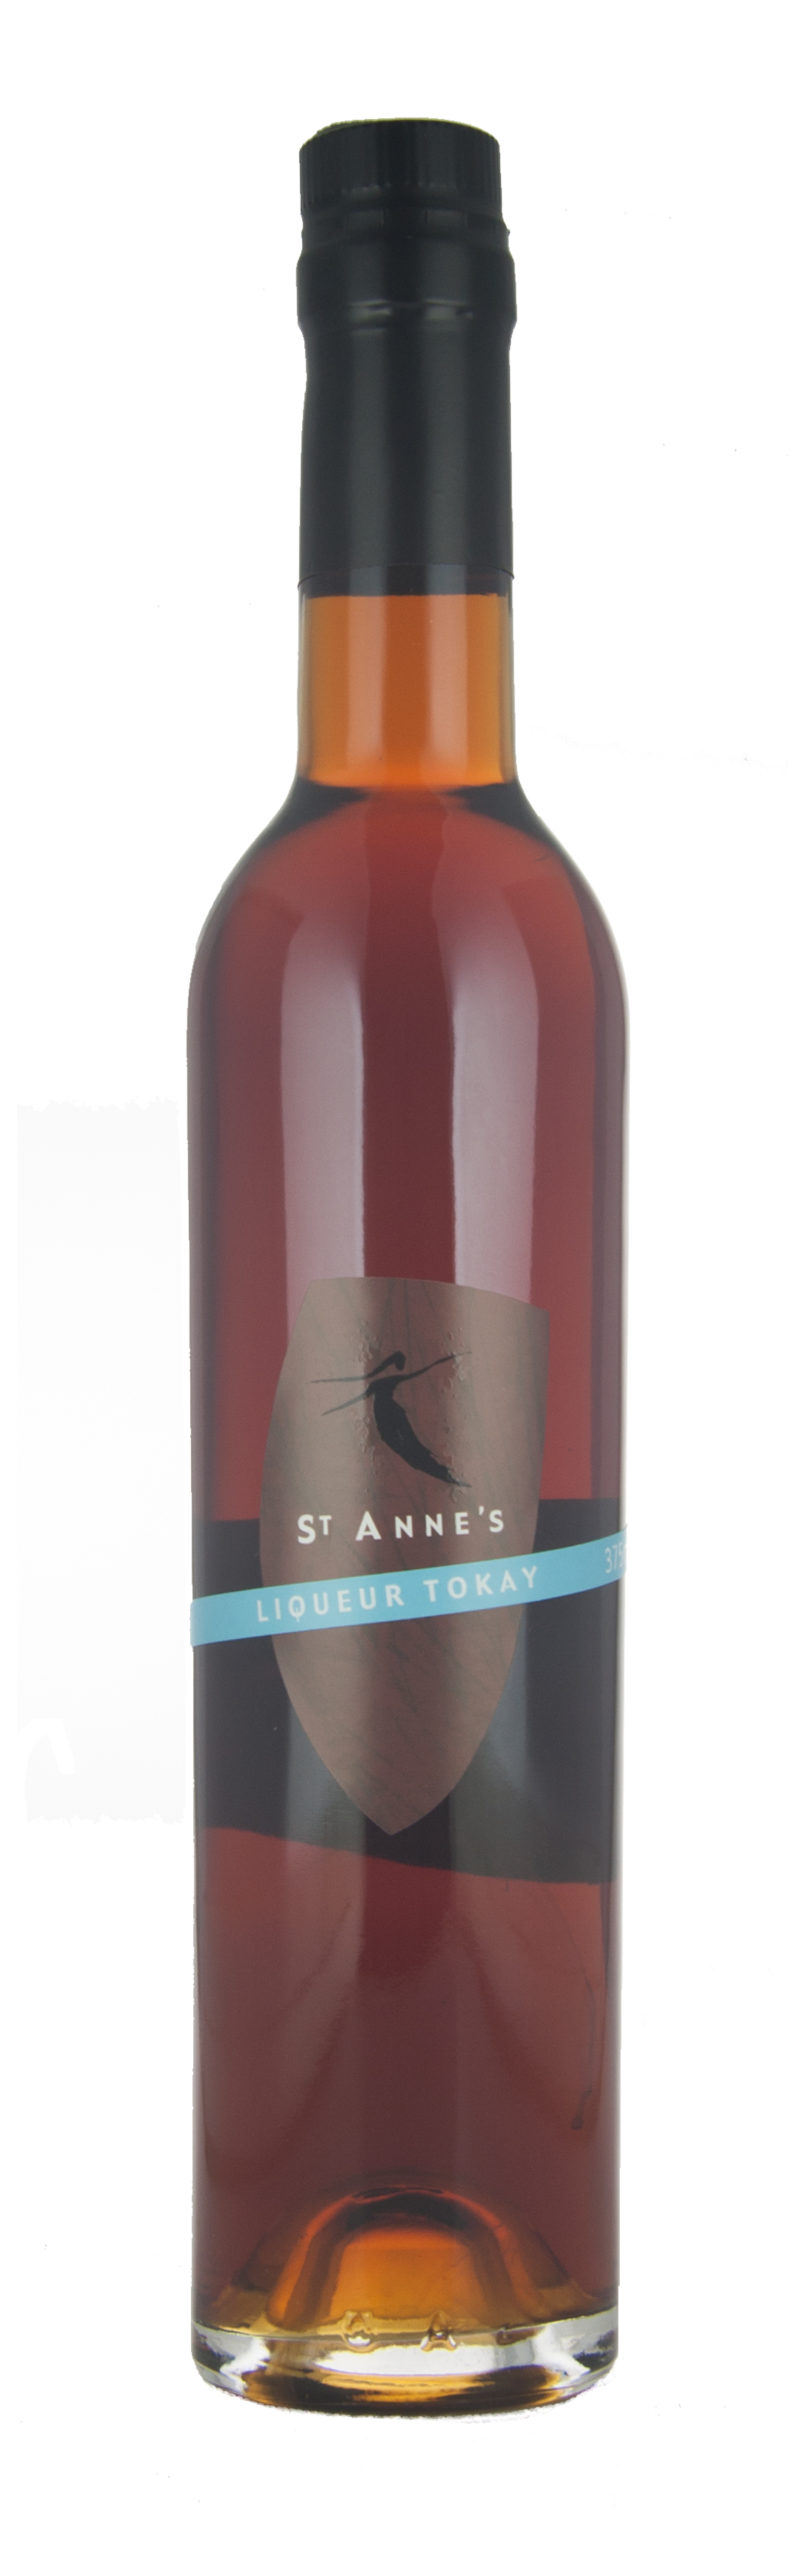 St Anne's Liqueur Tokay at St Anne's Winery